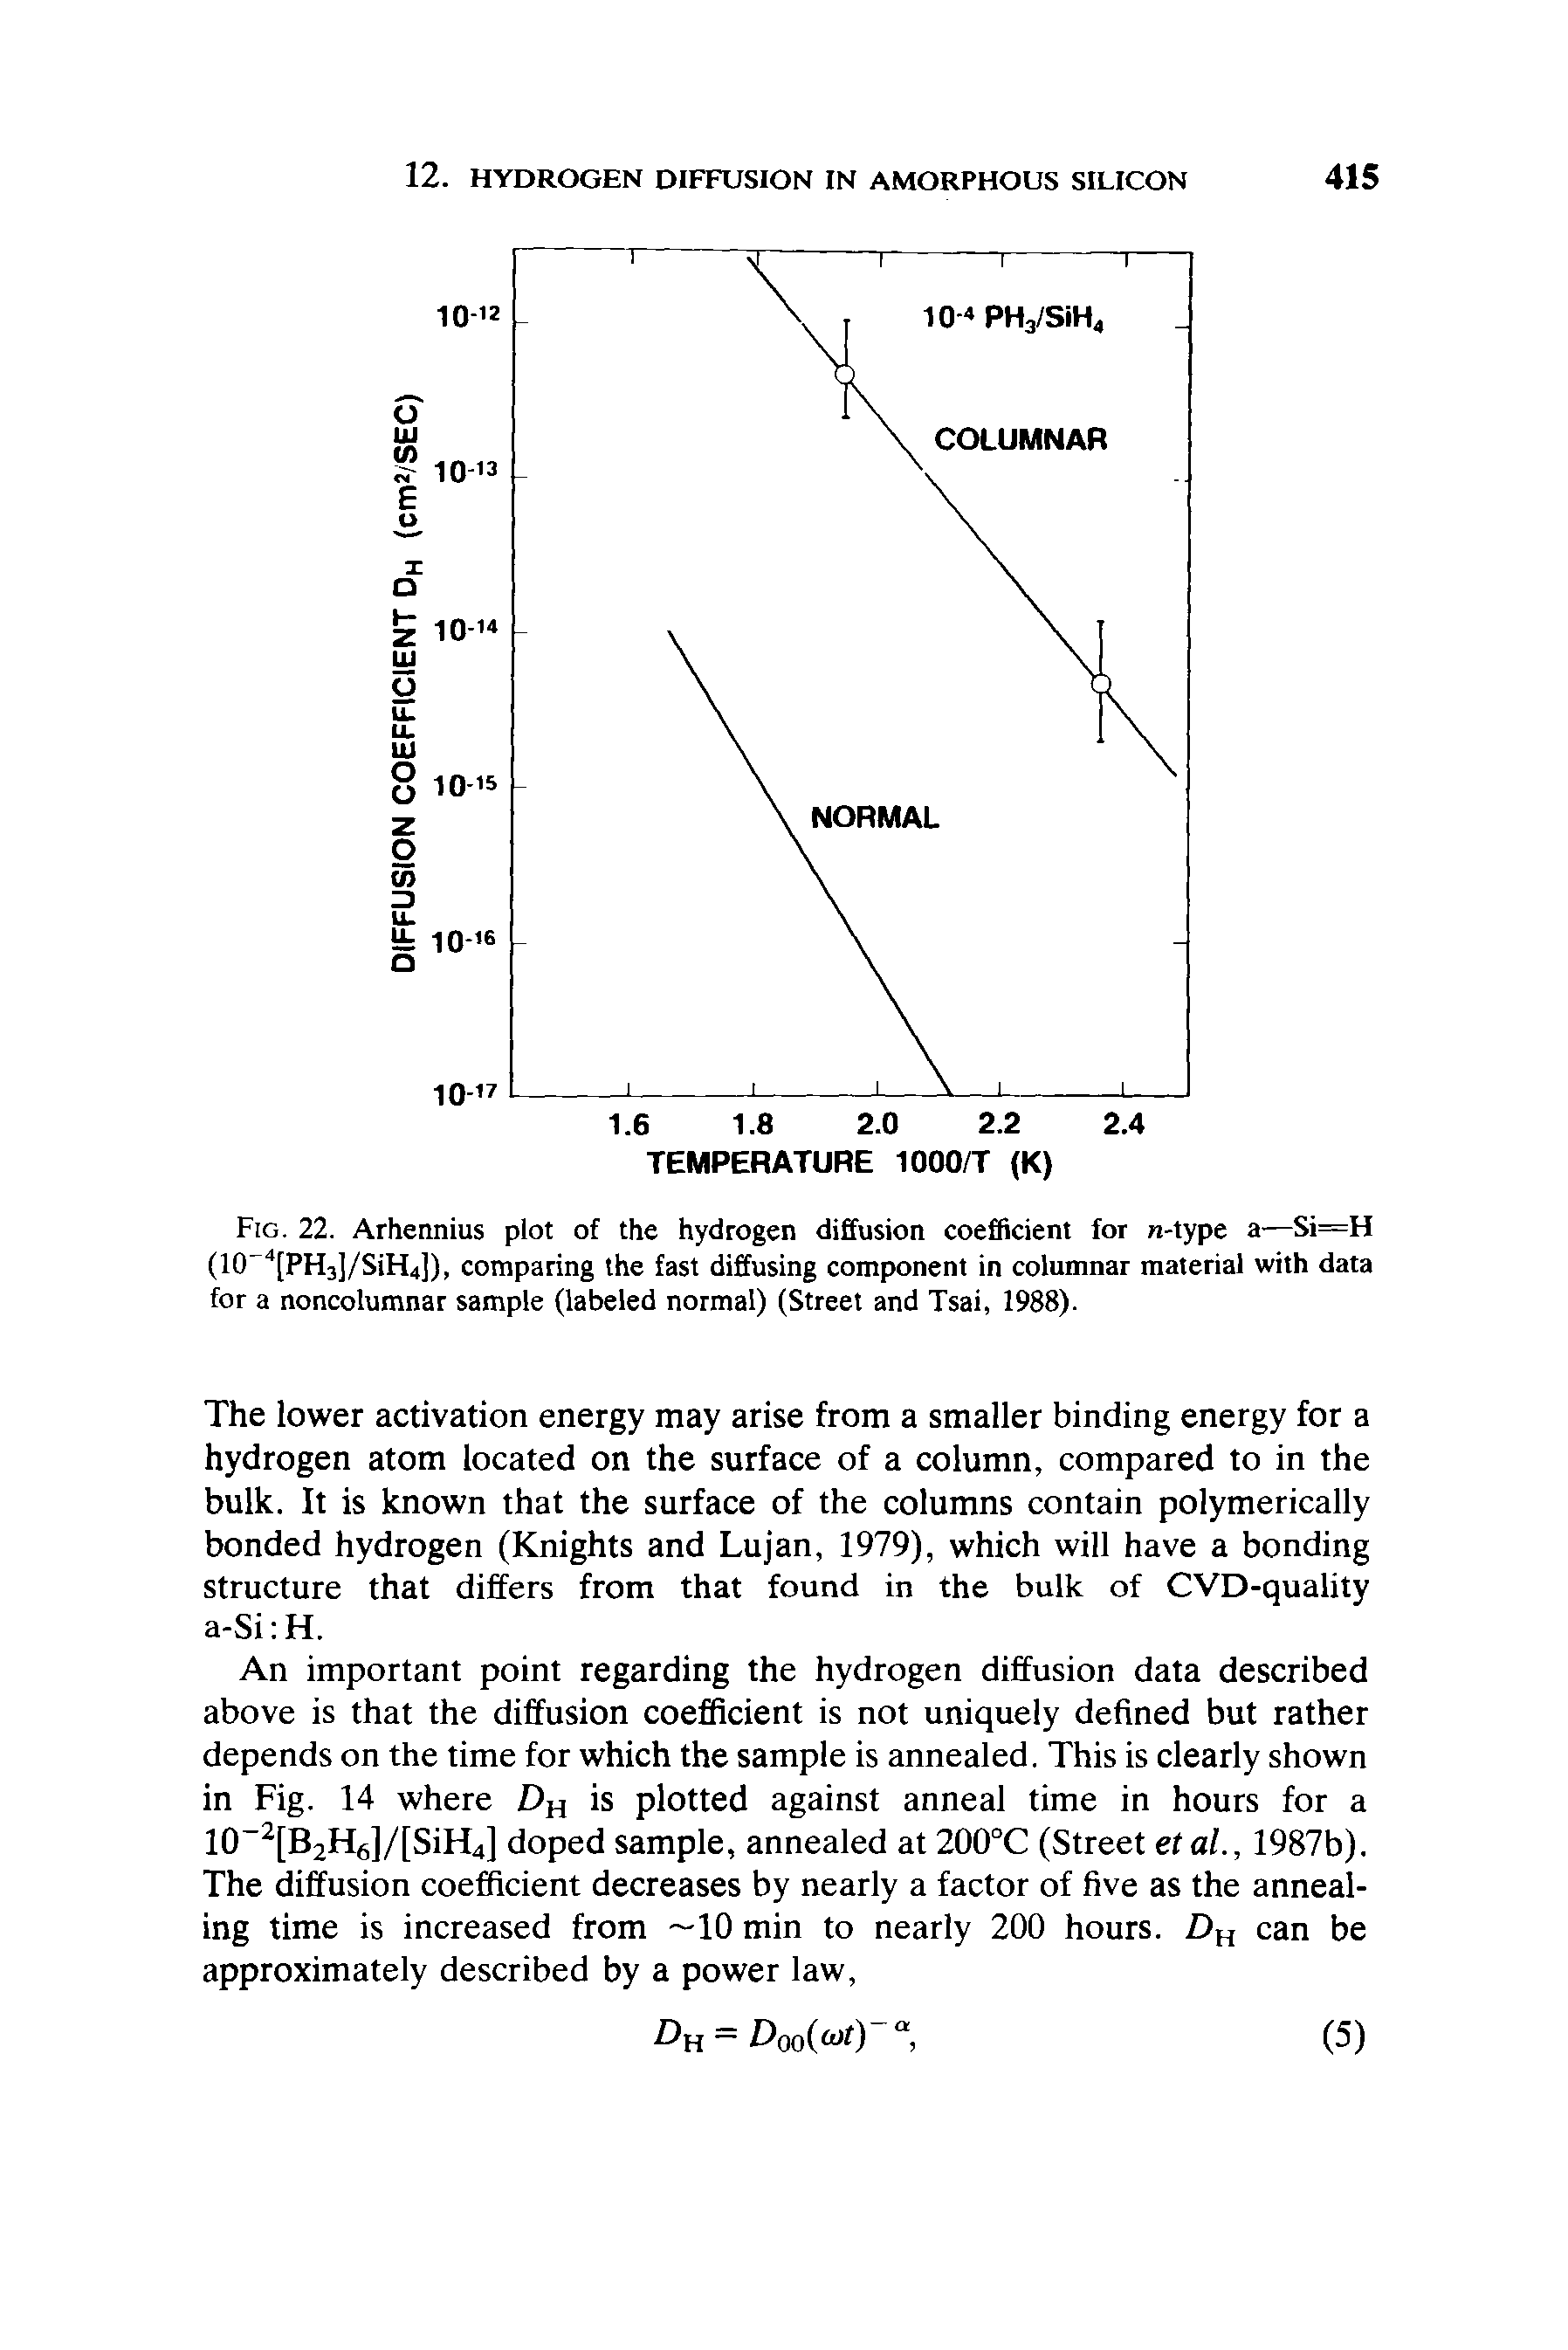 Fig. 22. Arhennius plot of the hydrogen diffusion coefficient for n-type a—Si=H (HT 4[PH3]/SiH4]), comparing the fast diffusing component in columnar material with data for a noncolumnar sample (labeled normal) (Street and Tsai, 1988).